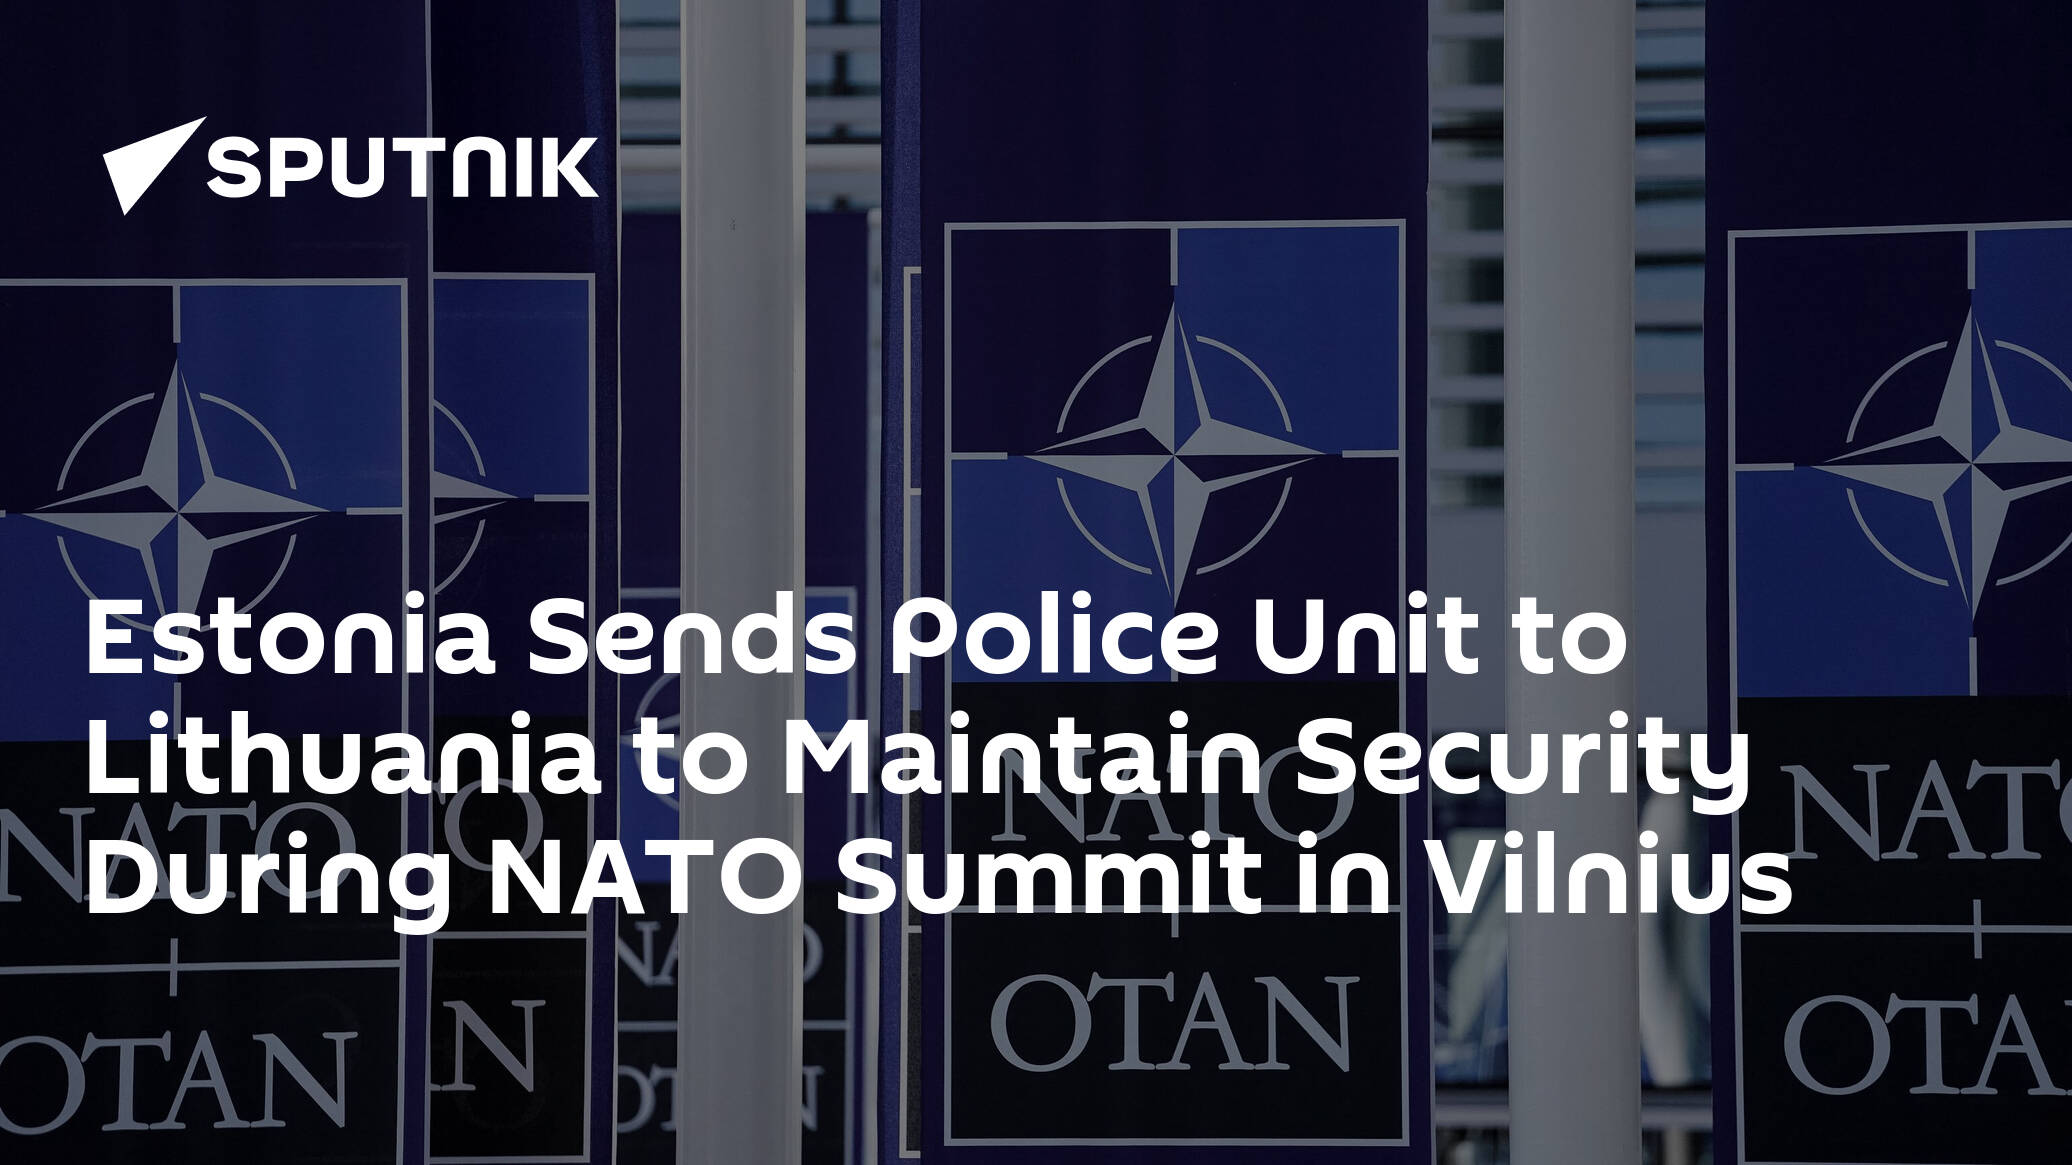 Estonia Sends Police Unit to Lithuania to Maintain Security During NATO Summit in Vilnius